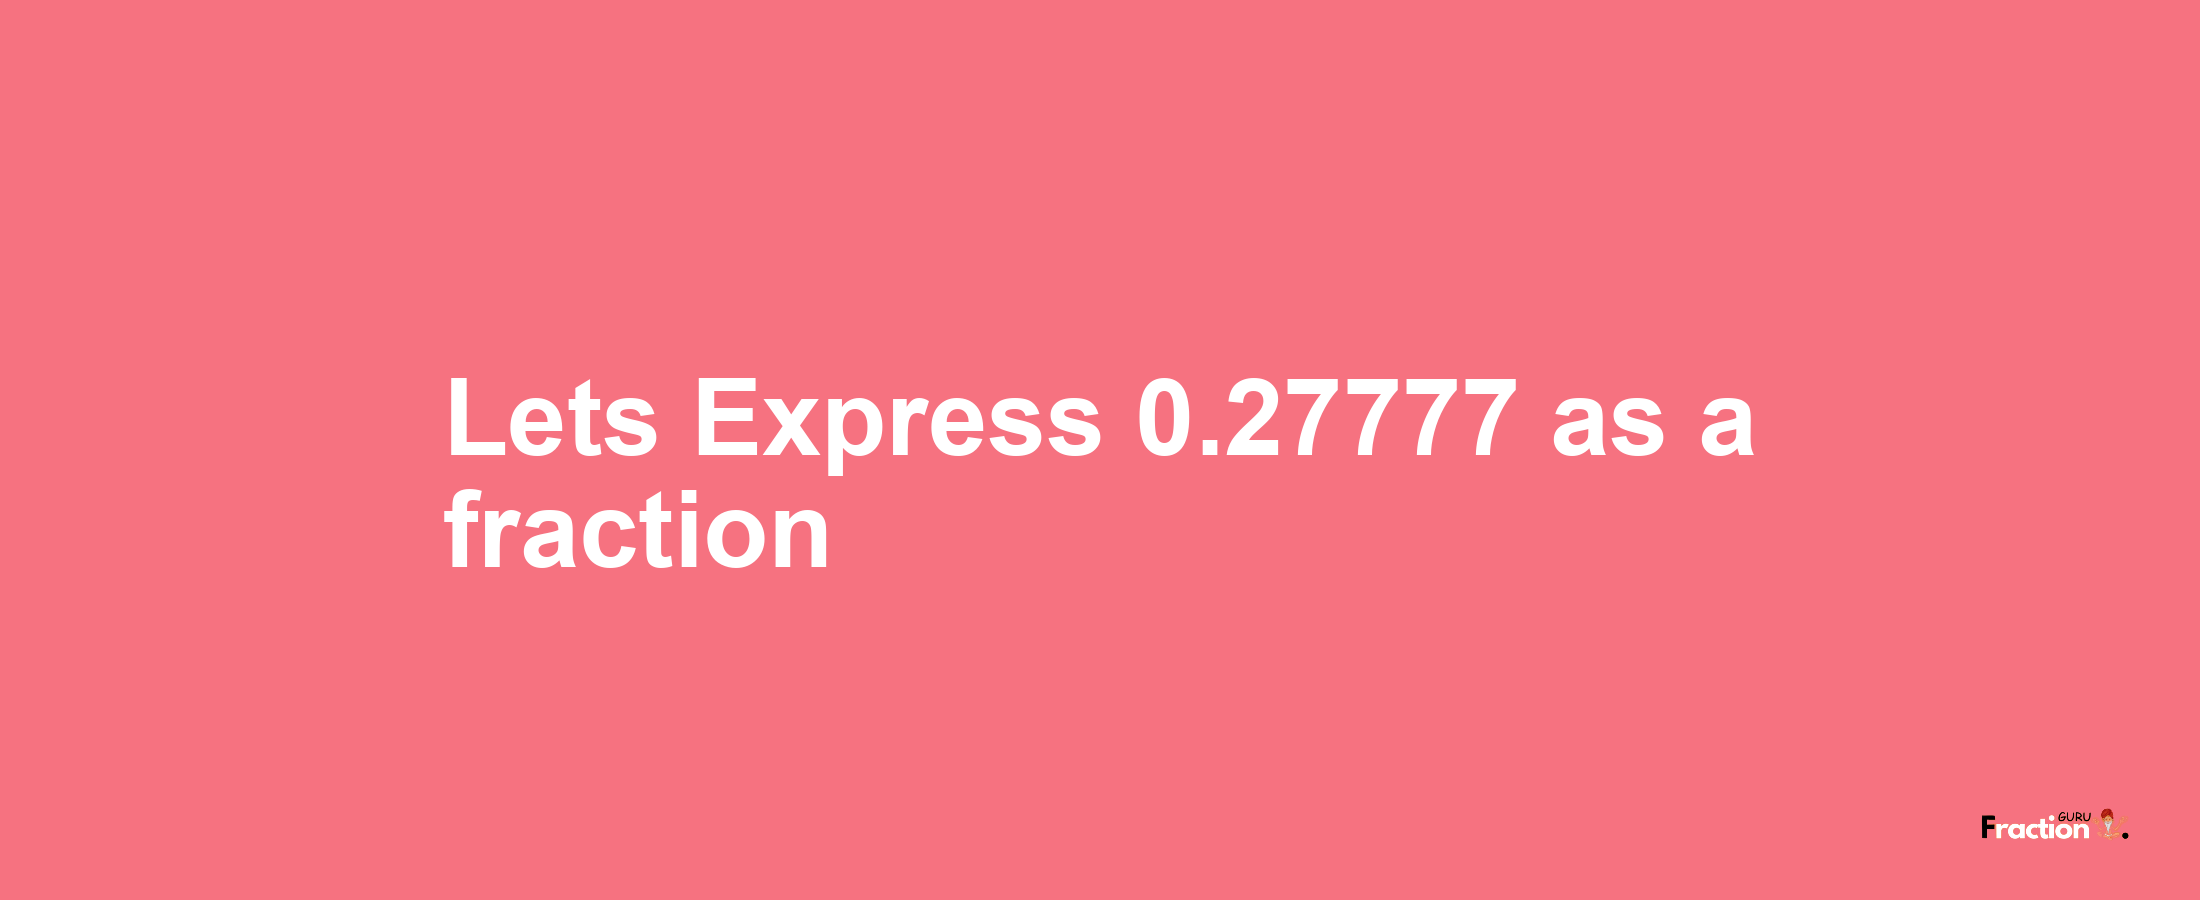 Lets Express 0.27777 as afraction